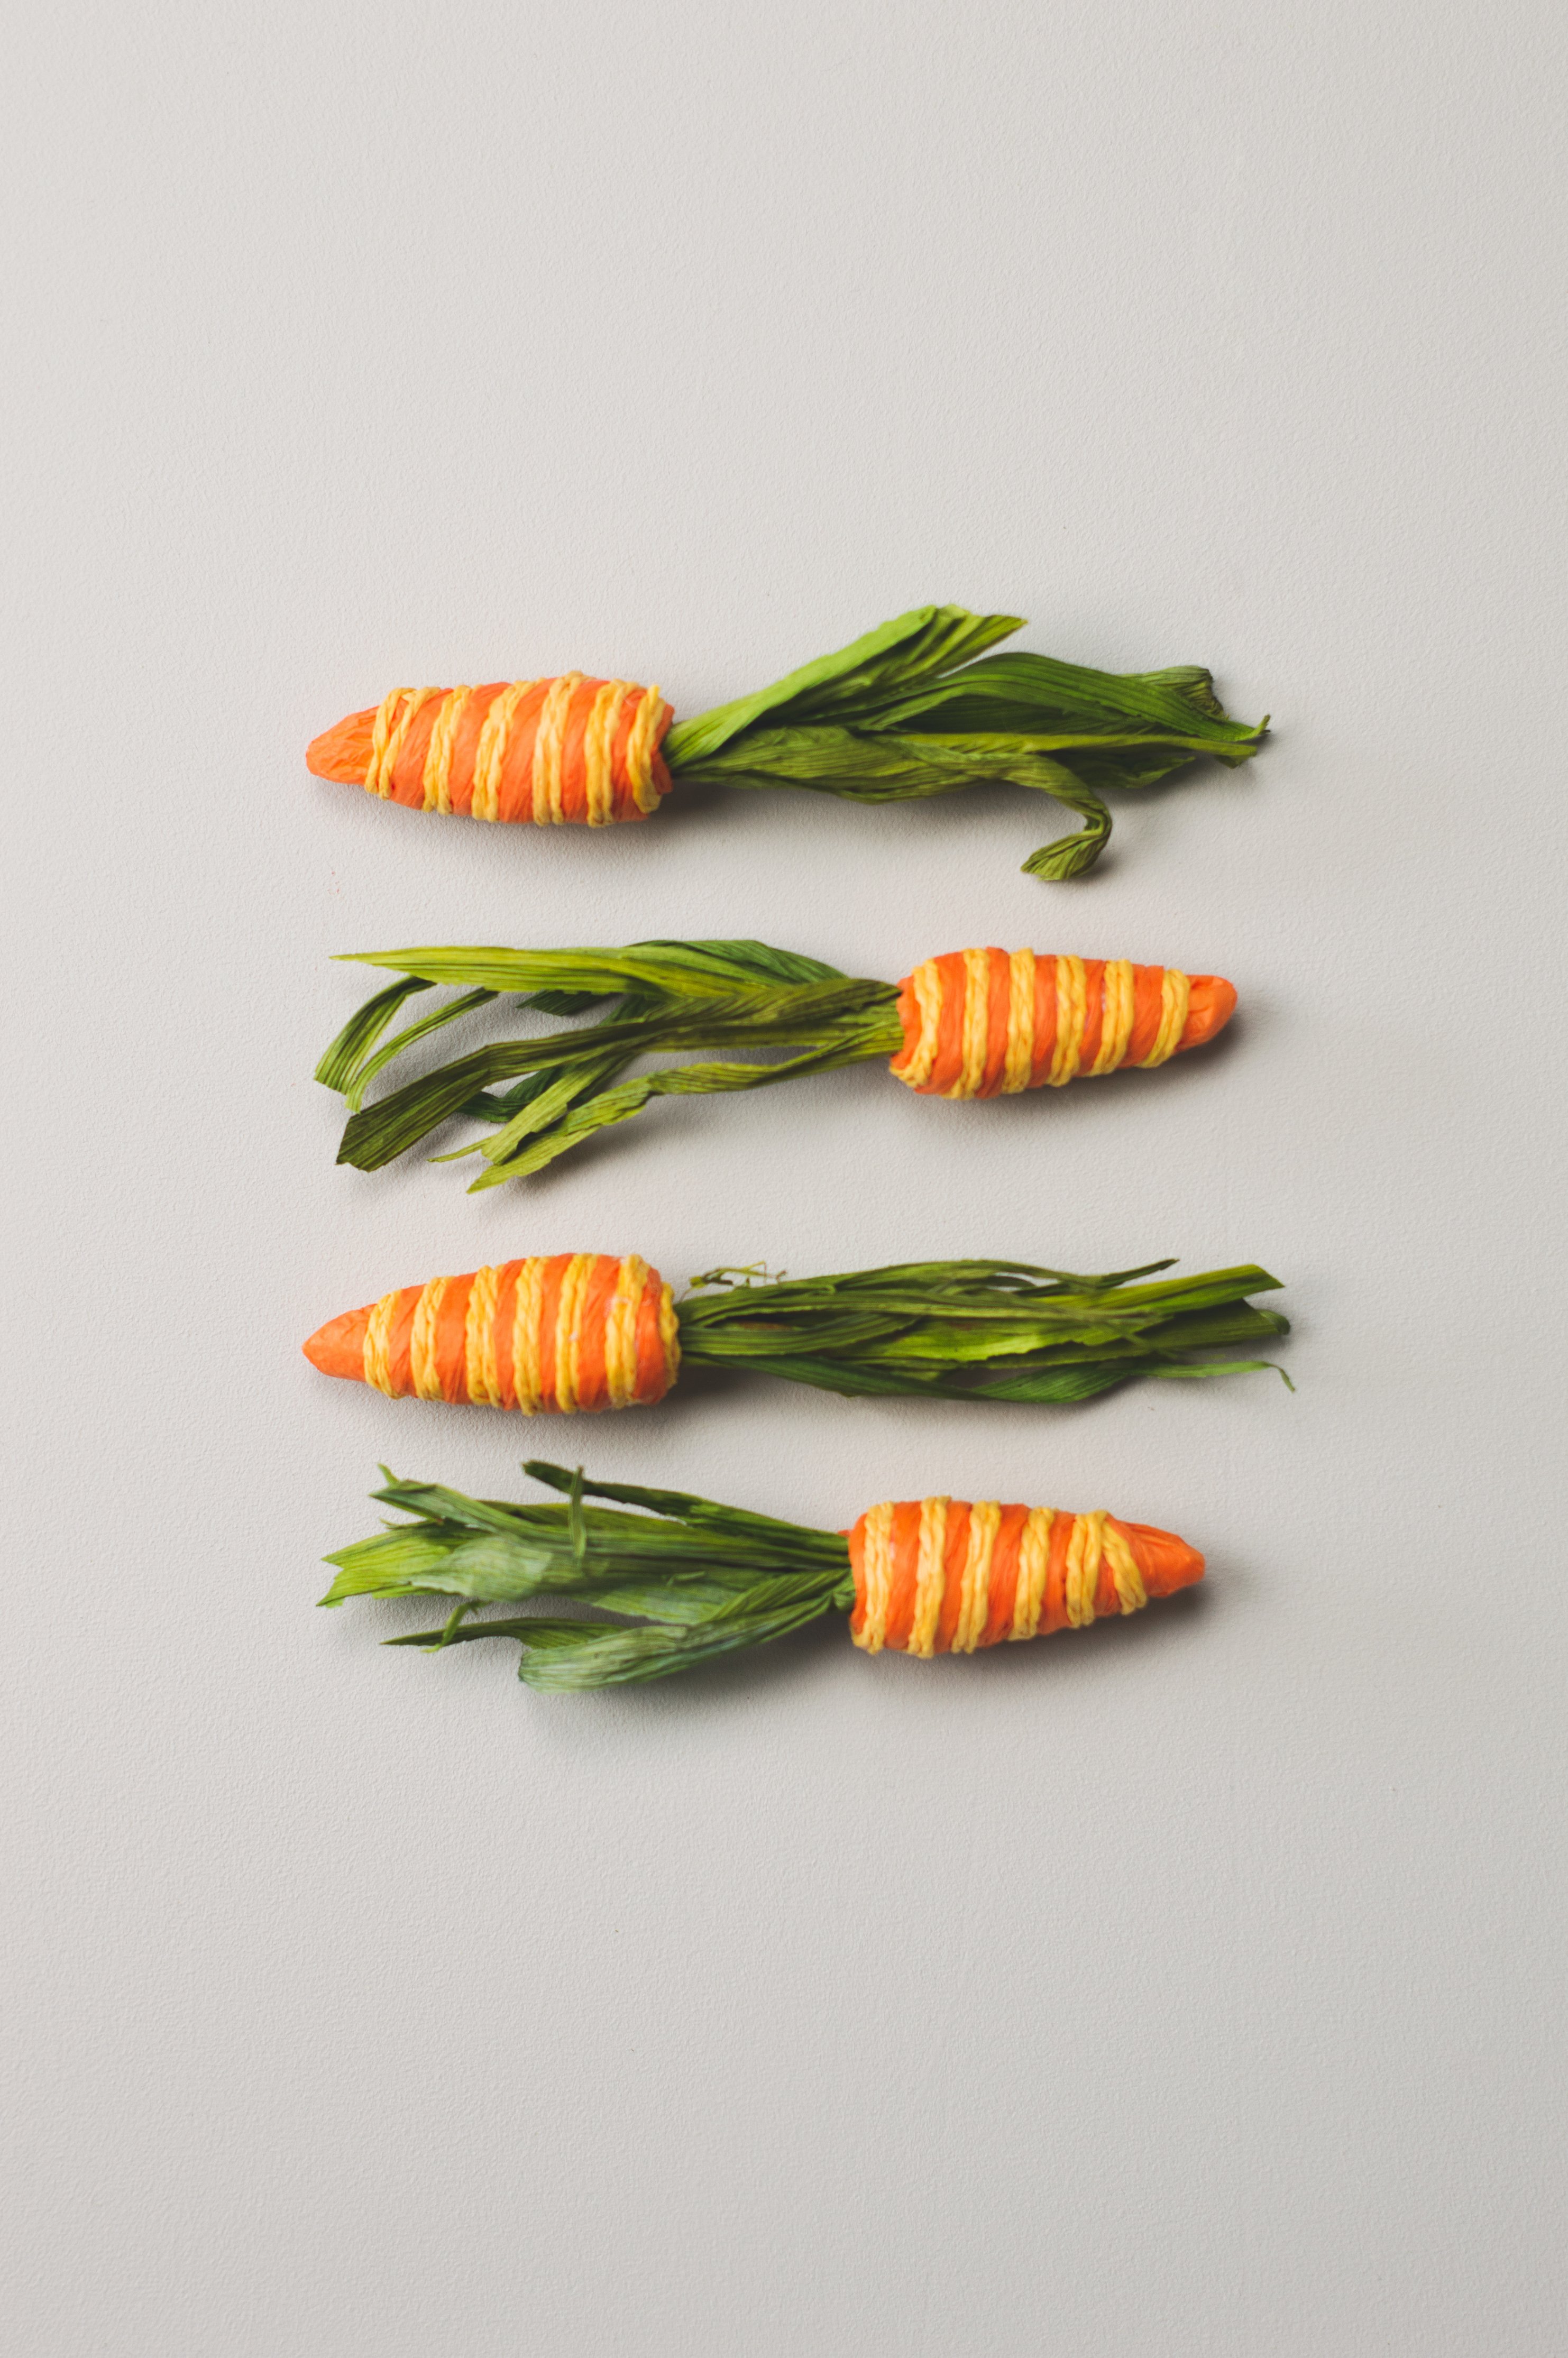 Four Paper Crafted Carrots